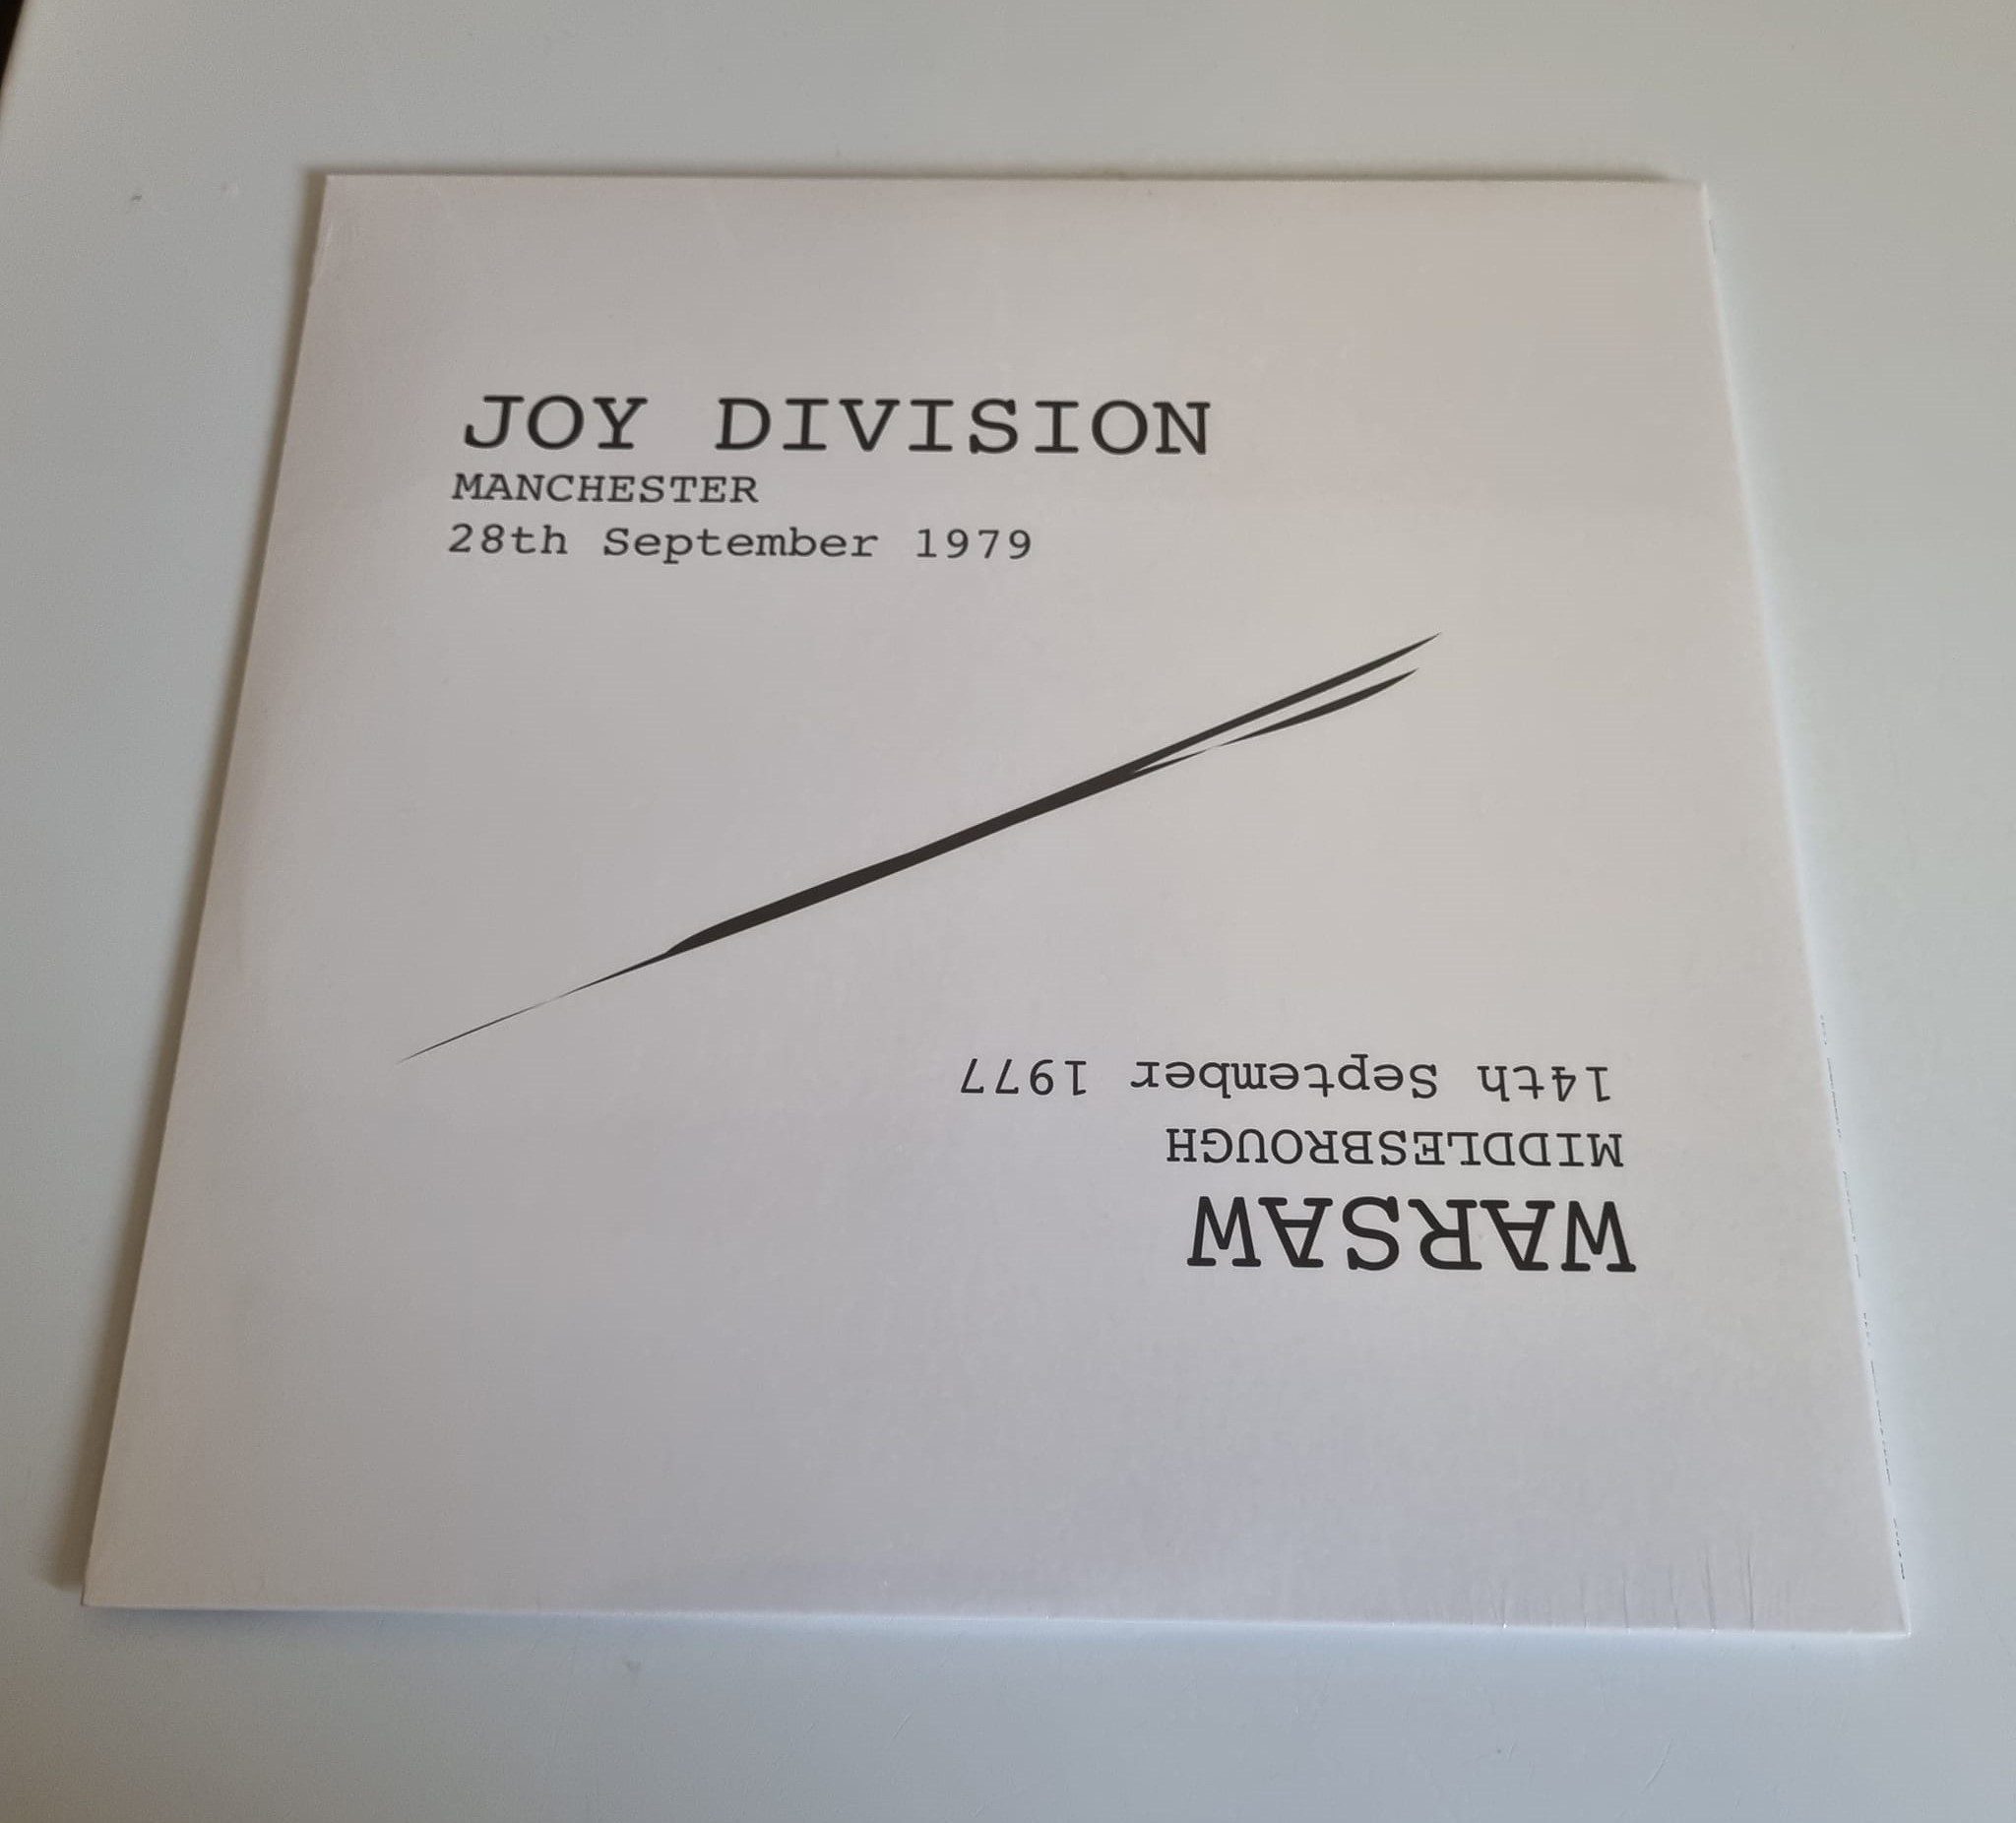 Buy this rare Warsaw-Joy Division record by clicking here